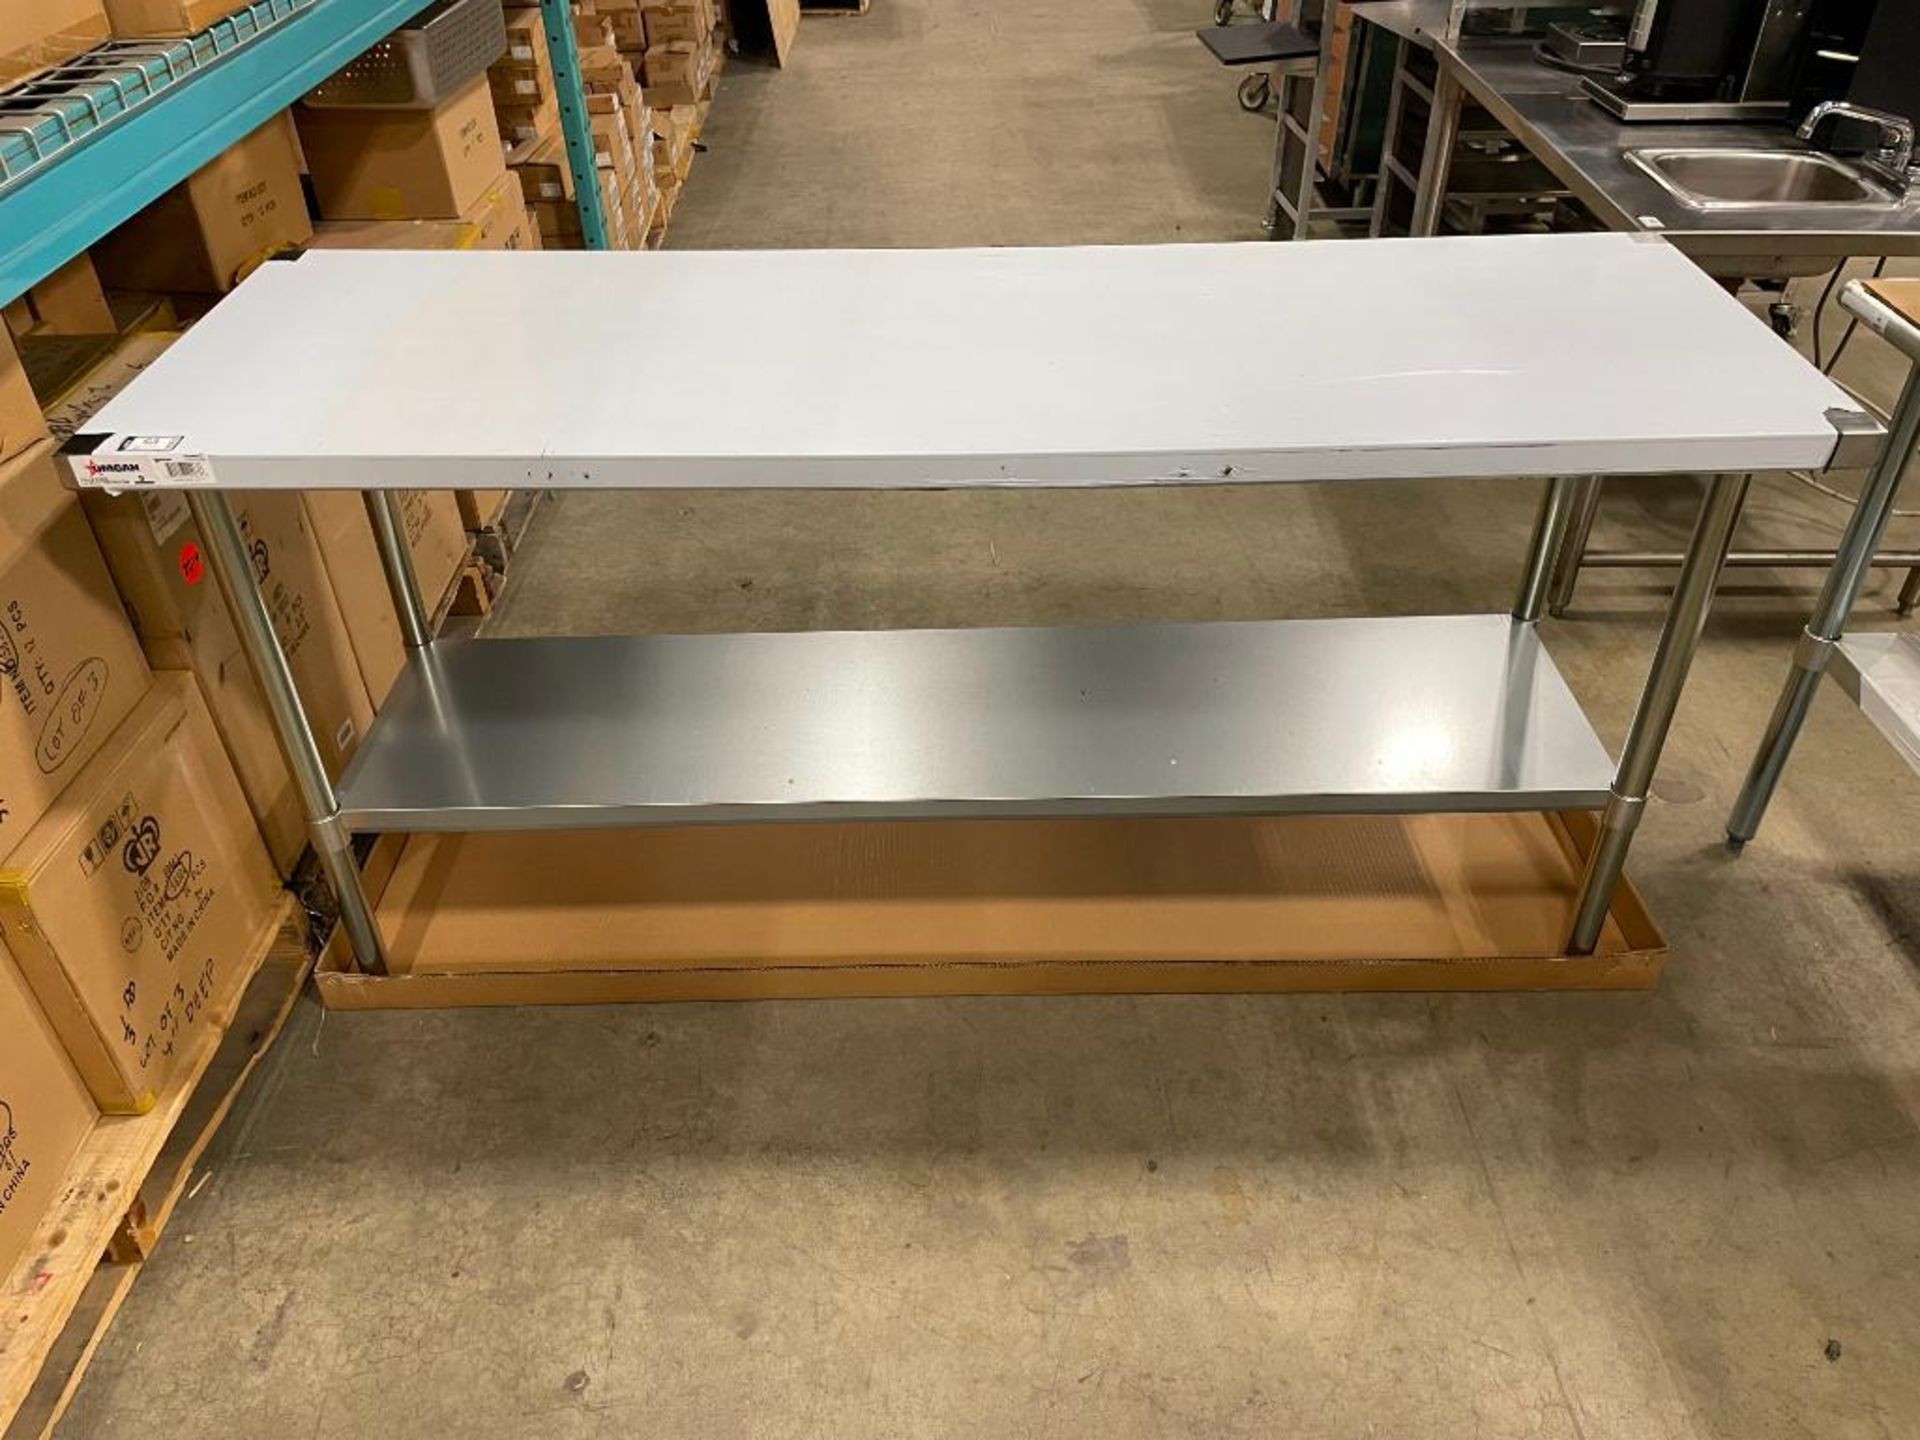 NEW 72" X 24" STAINLESS STEEL WORK TABLE - Image 3 of 4